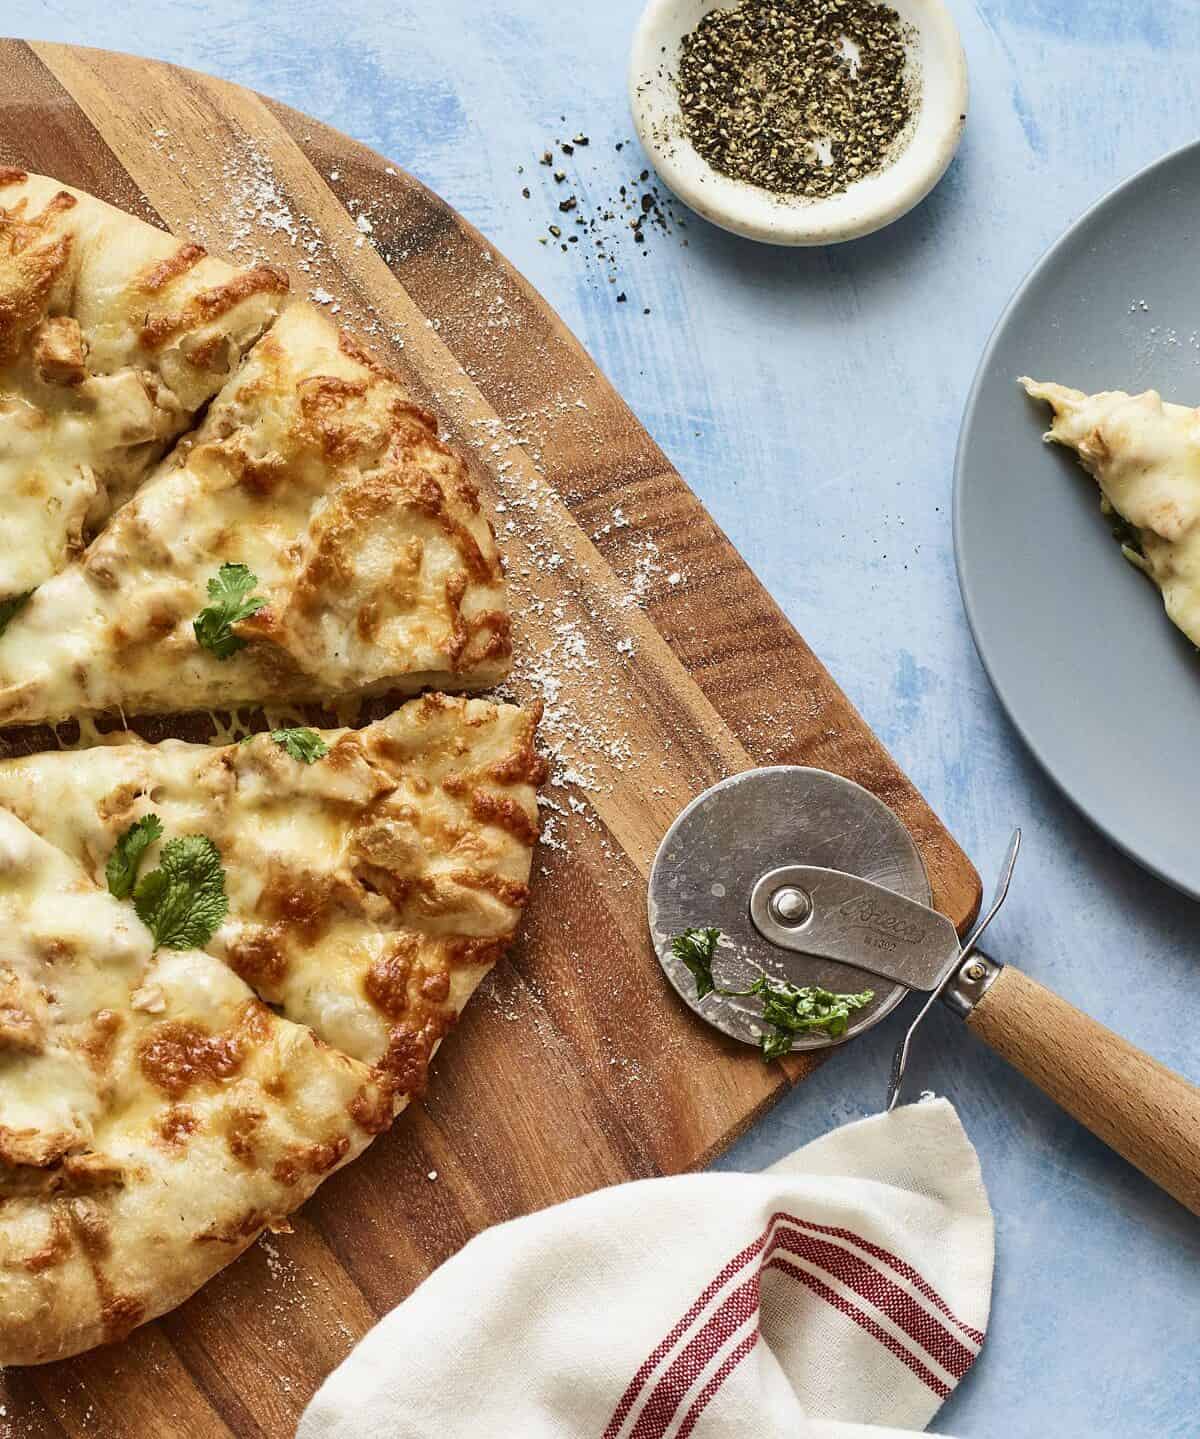  A lighter, healthier twist on traditional pizza, without sacrificing flavor!